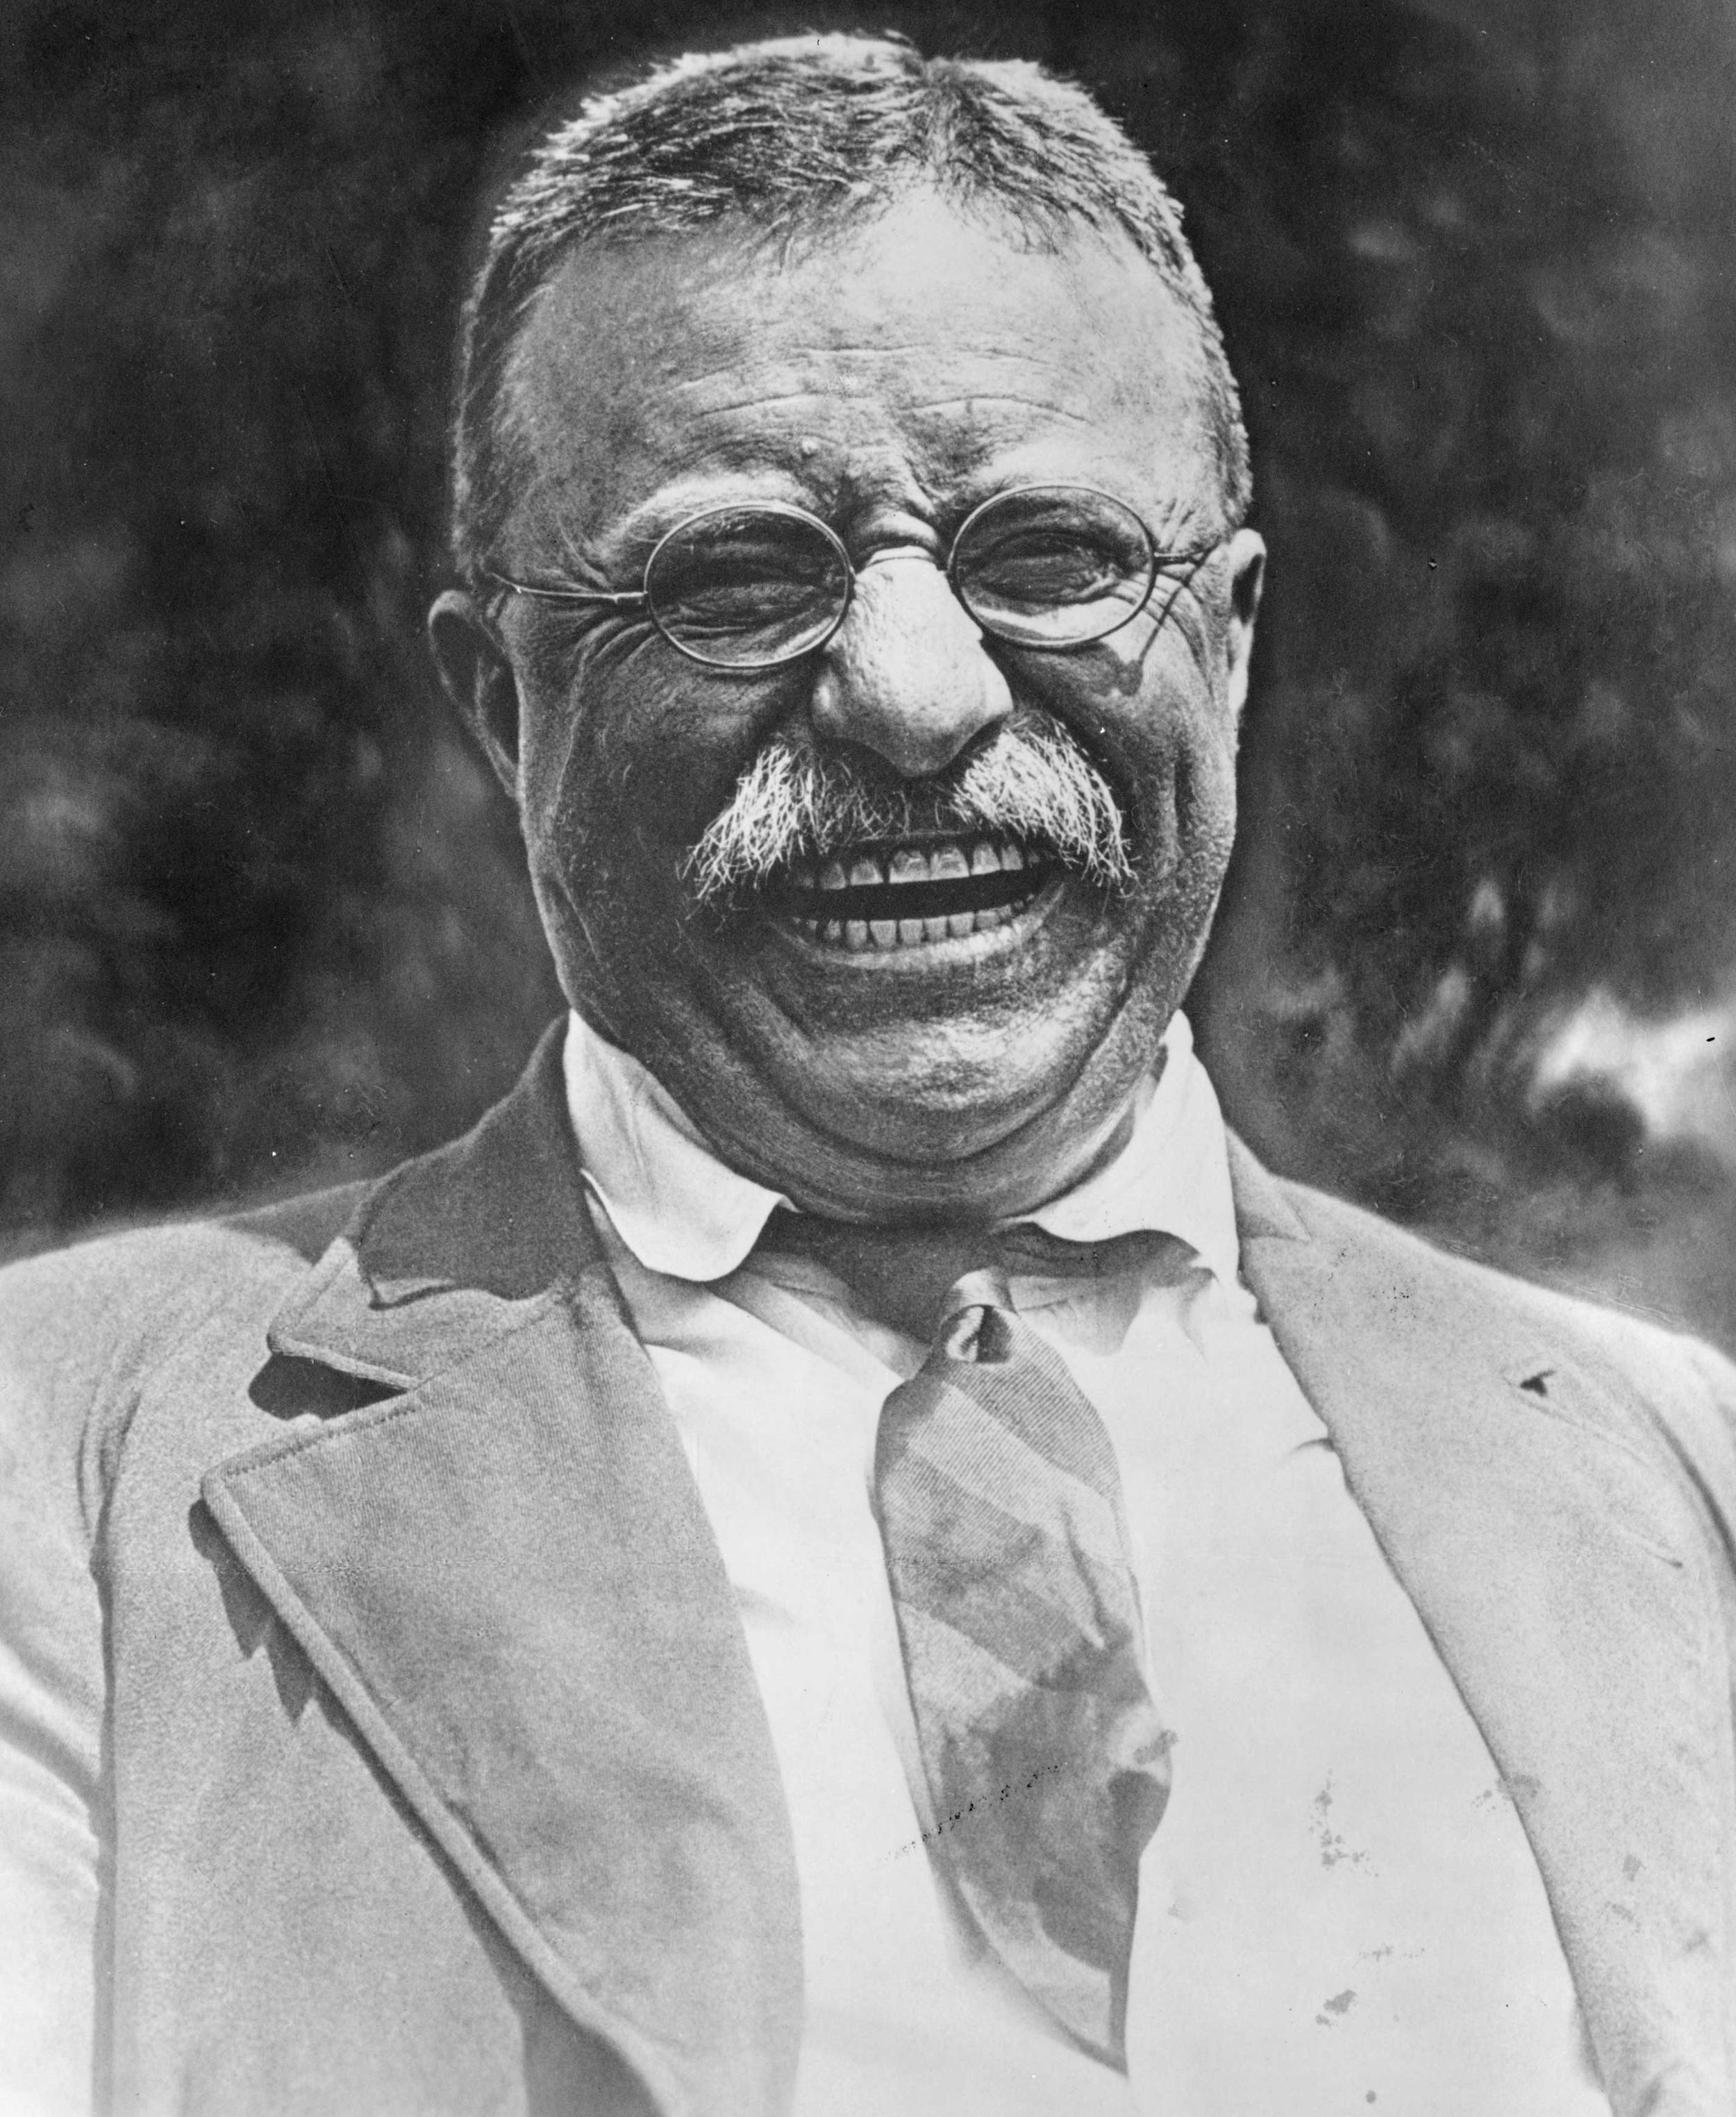 Theodore Roosevelt, laughing